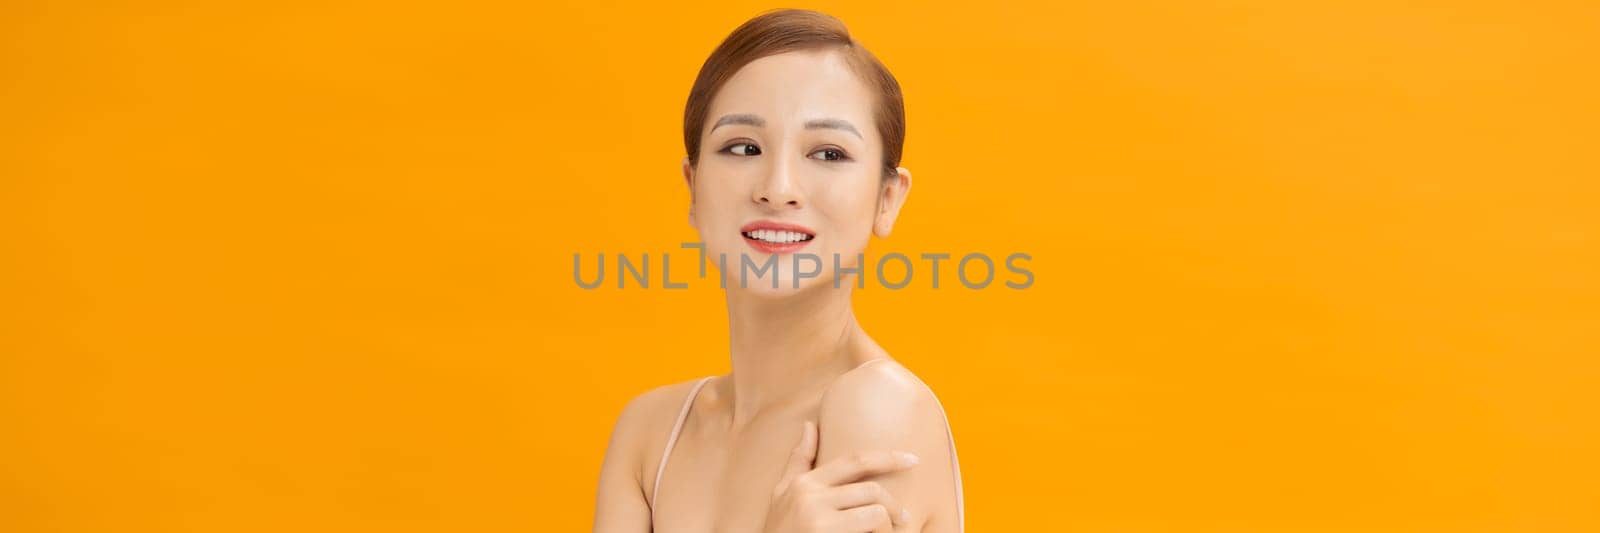 Youthful smiling Asian woman isolated on yellow banner background for beauty and skin care concepts by makidotvn